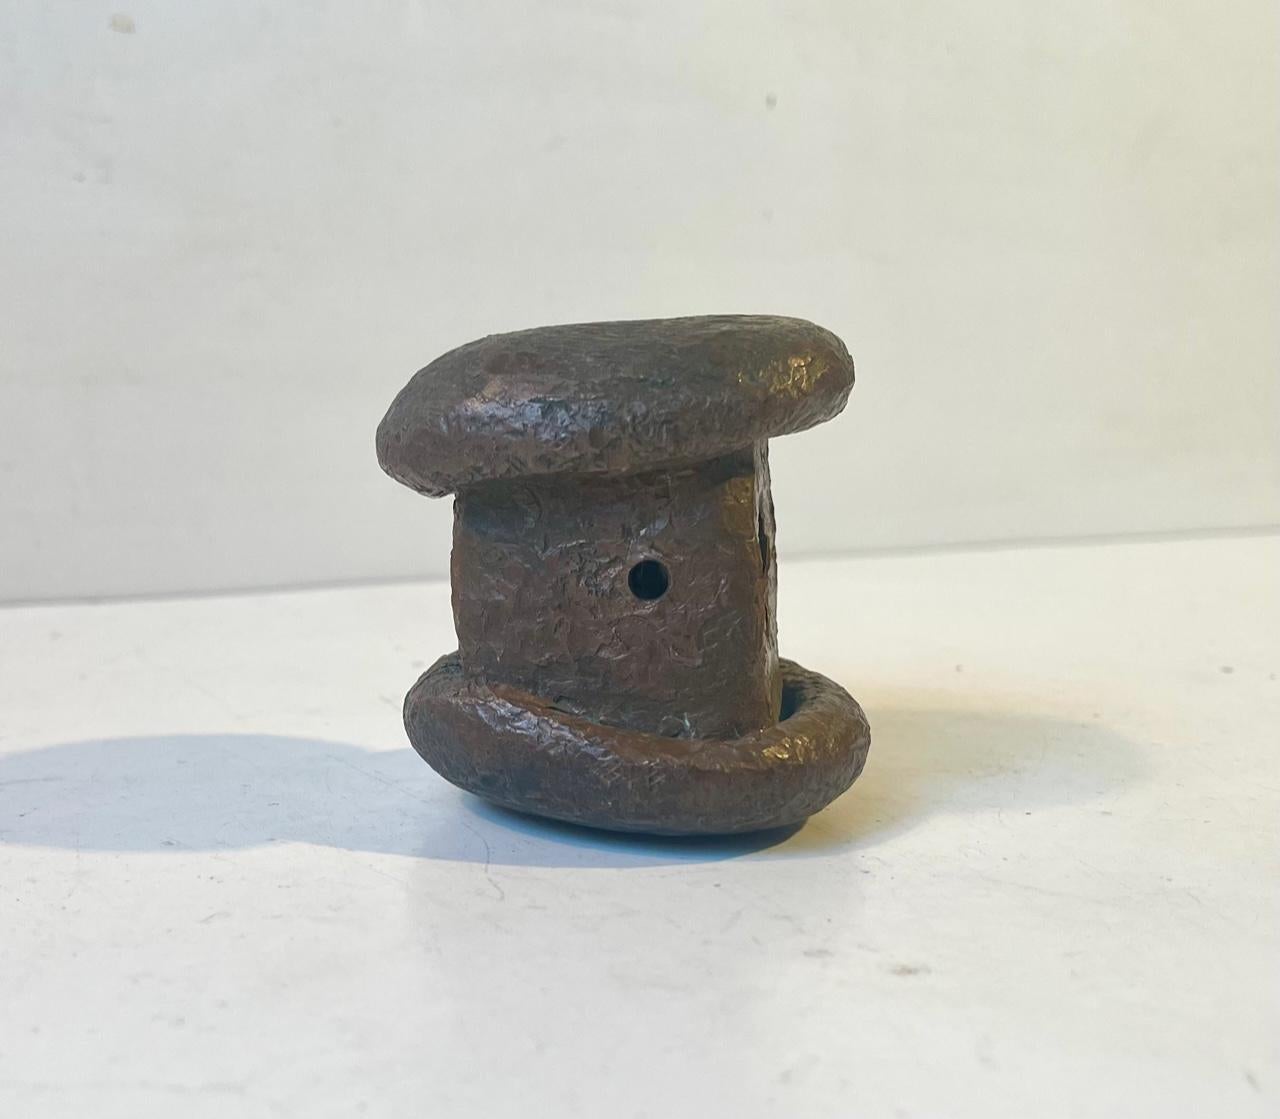 Decorative old blacksmith's hammer head in solid copper. Authentic raw brutalist appearance. Used for metal work. Made in Denmark during the mid-late 19th century. Measurements: 6.5 x 6.5 x 6 cm.